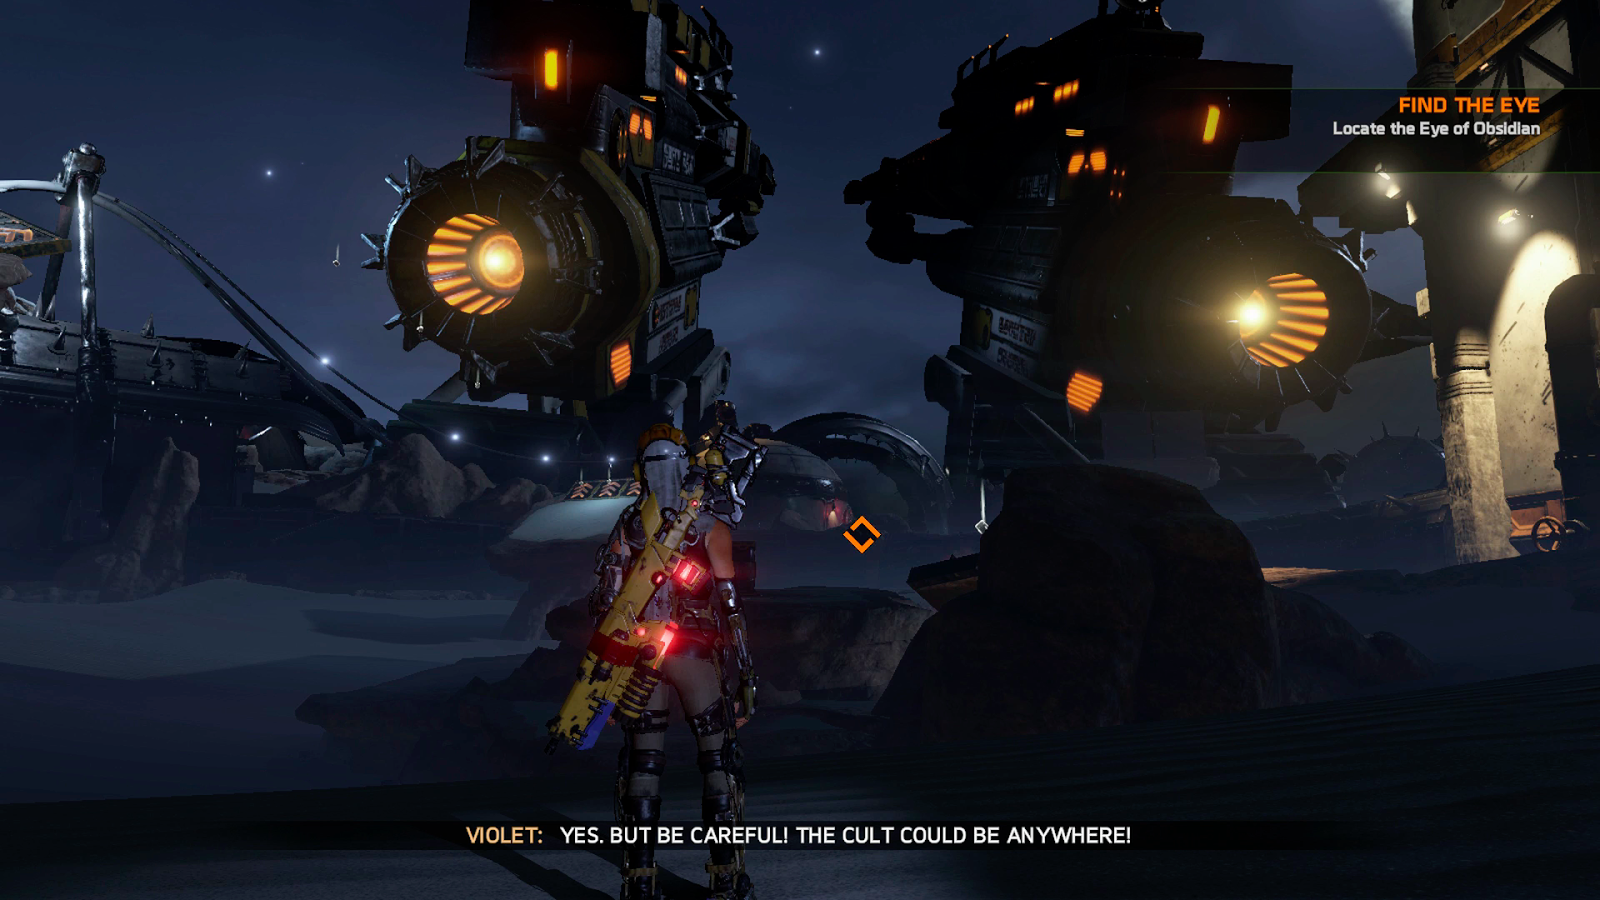 50 Weeks Later, Major Update Improves Flawed Xbox Exclusive ReCore